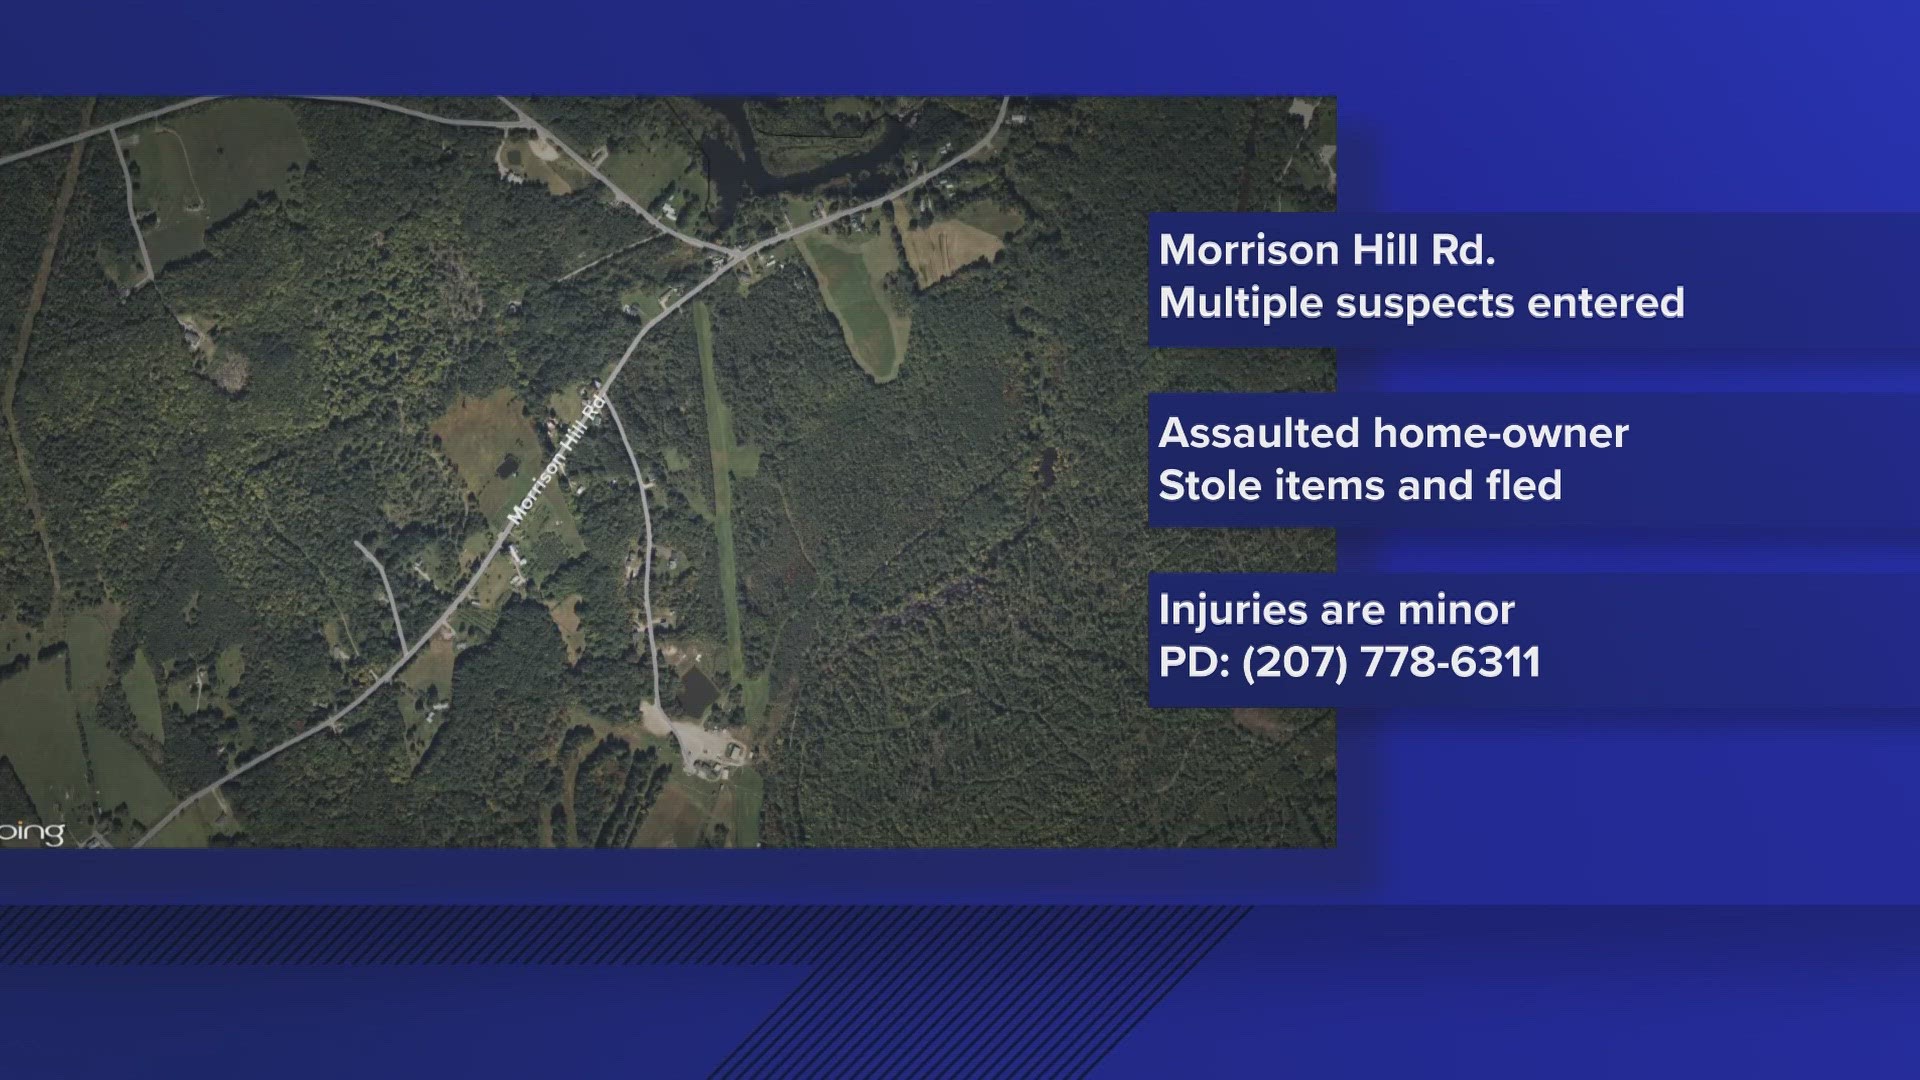 Police found a man with minor injuries when they arrived at the home on Morrison Hill Road late Wednesday night.